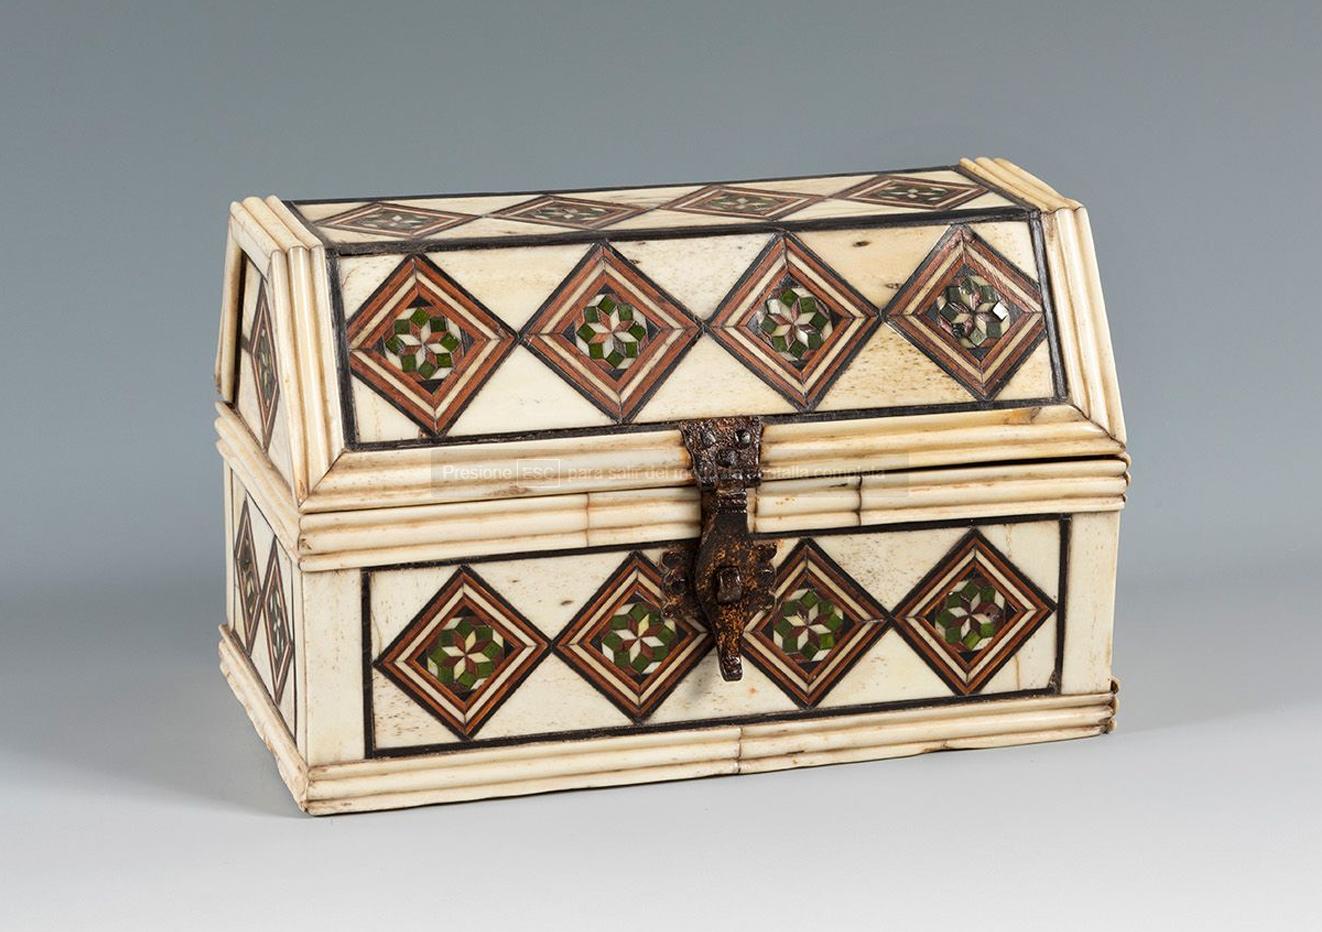 The chest is constructed from a wooden core, covered on the outside with a beautiful geometric ornamental marquetry design. It has a lock on the front. The decoration is organised in rhomboid-shaped strips of stained walnut and bone wood, using the